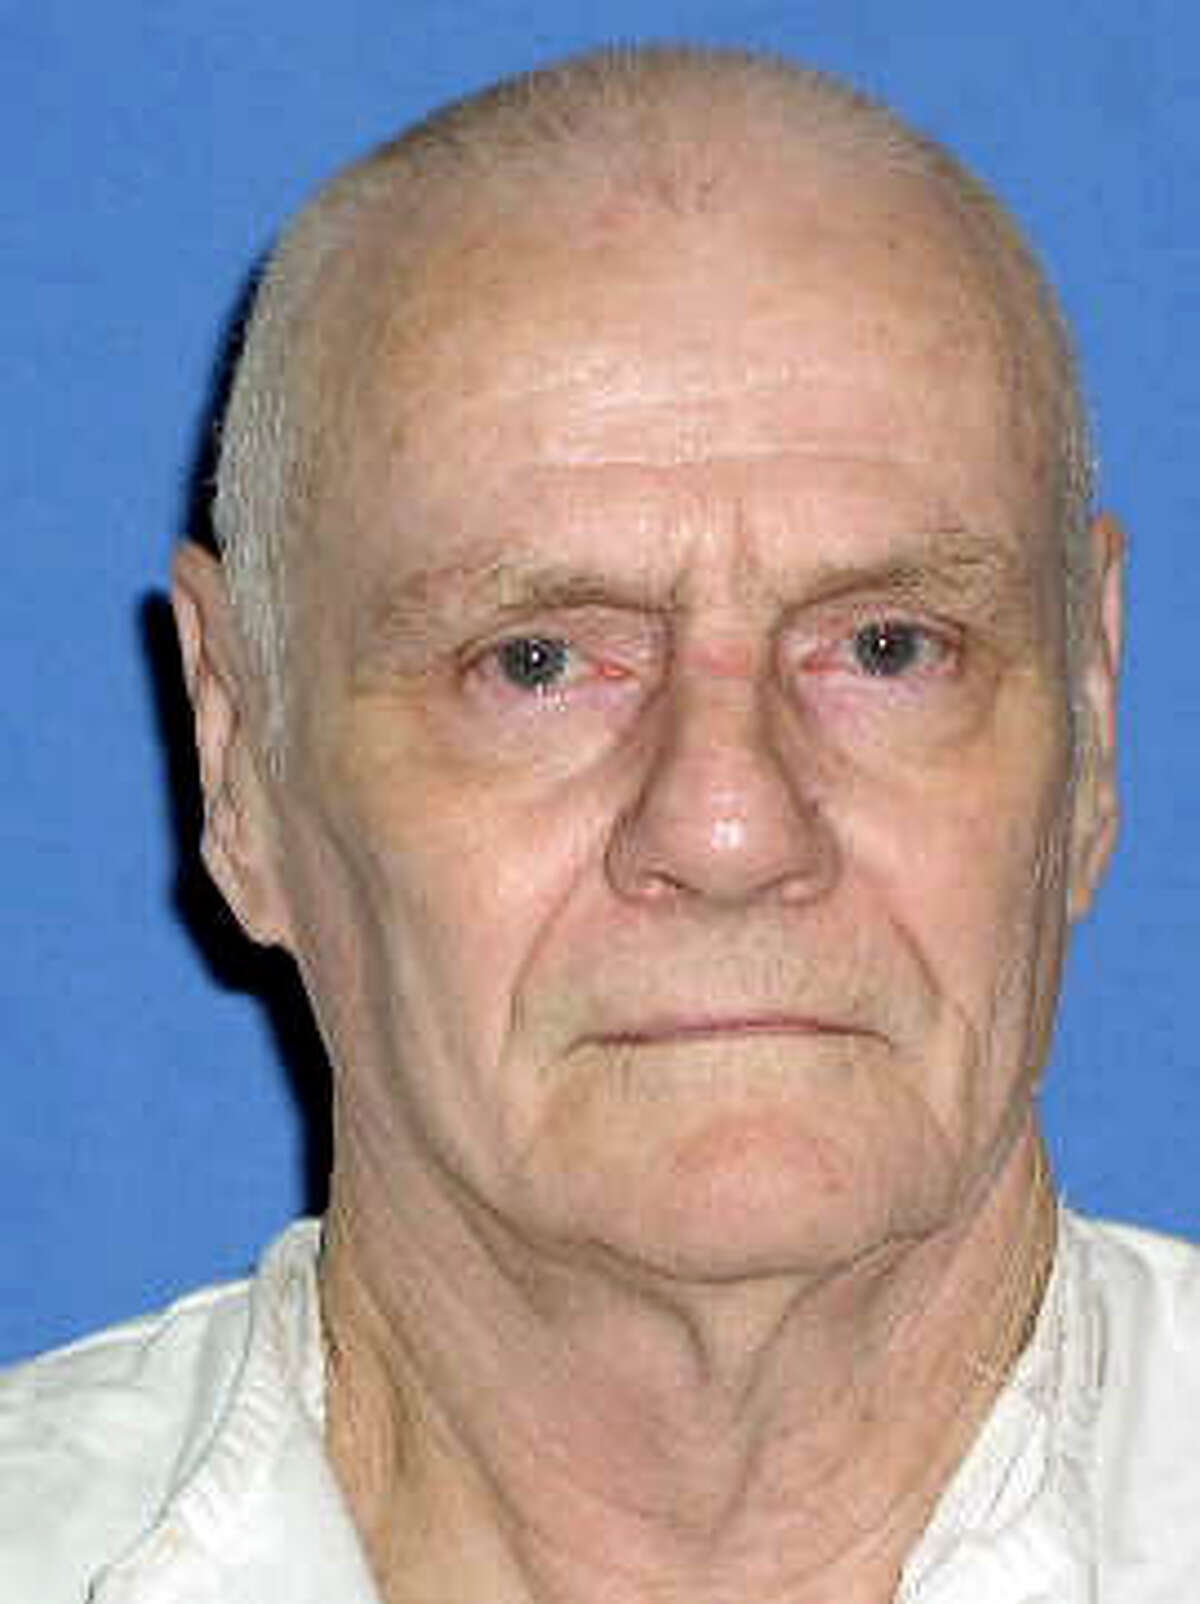 This photo released by the Texas Department of Criminal Justice shows Jack Harry Smith, 70, the oldest condemned man in Texas who lost an appeal Tuesday before the U.S. Supreme Court. Smith has been on death row nearly 30 years for a fatal shooting during a $90 robbery of a Houston store. Only six of the 371 prisoners awaiting execution in the state have been on death row longer. (AP Photo/Texas Department of Criminal Justice)